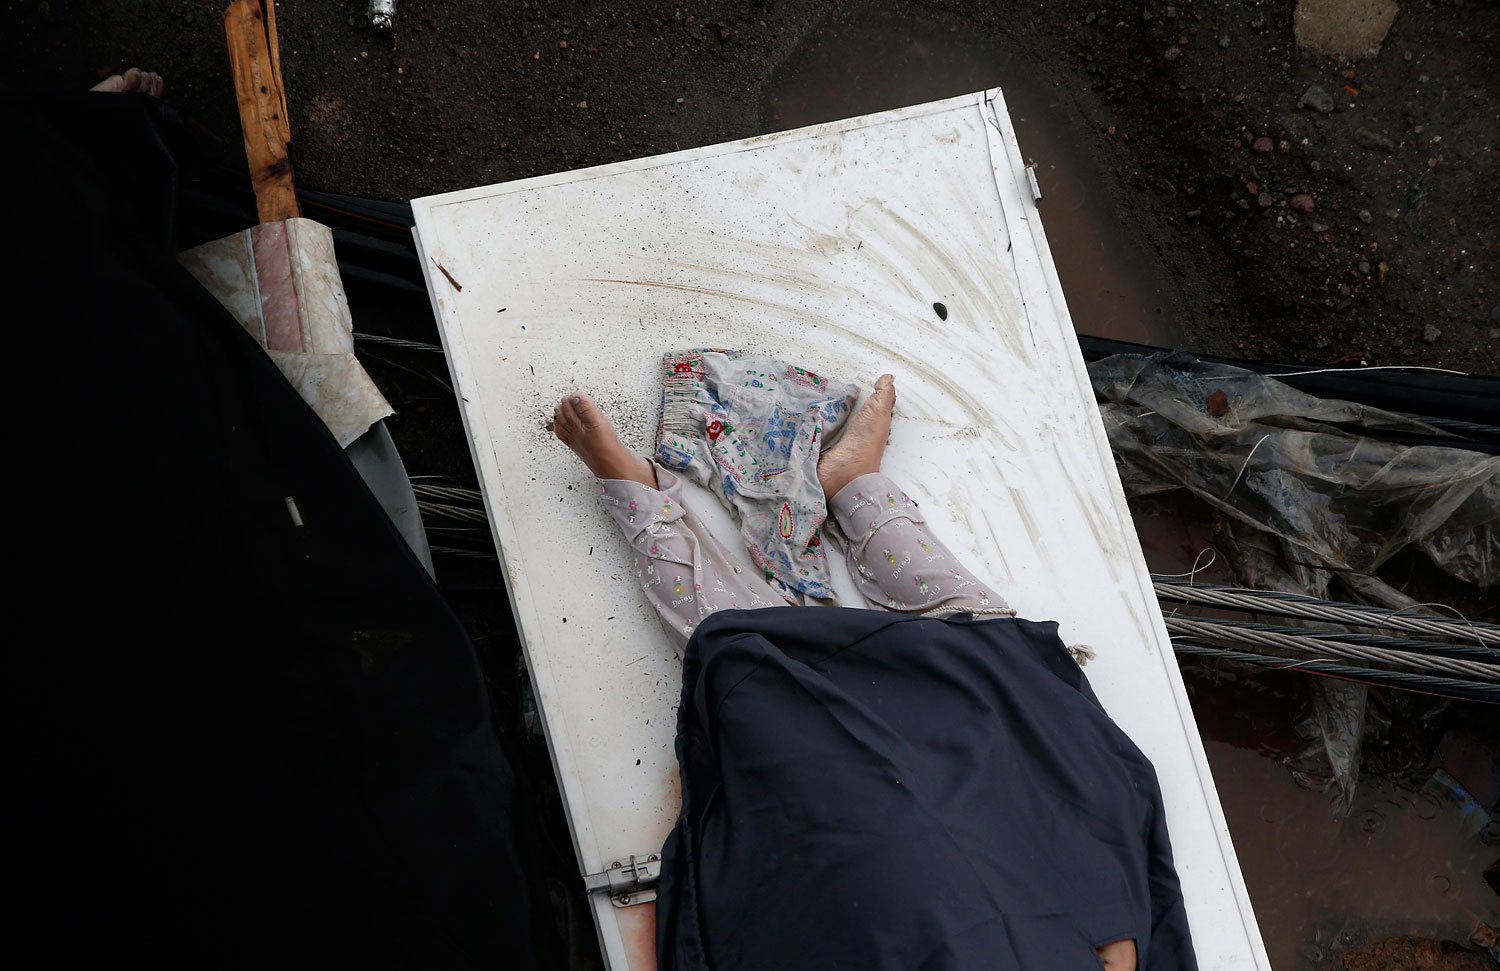 The body of a typhoon victim lies on a door after Typhoon Haiyan battered Tacloban city in central Philippines, November 10, 2013.